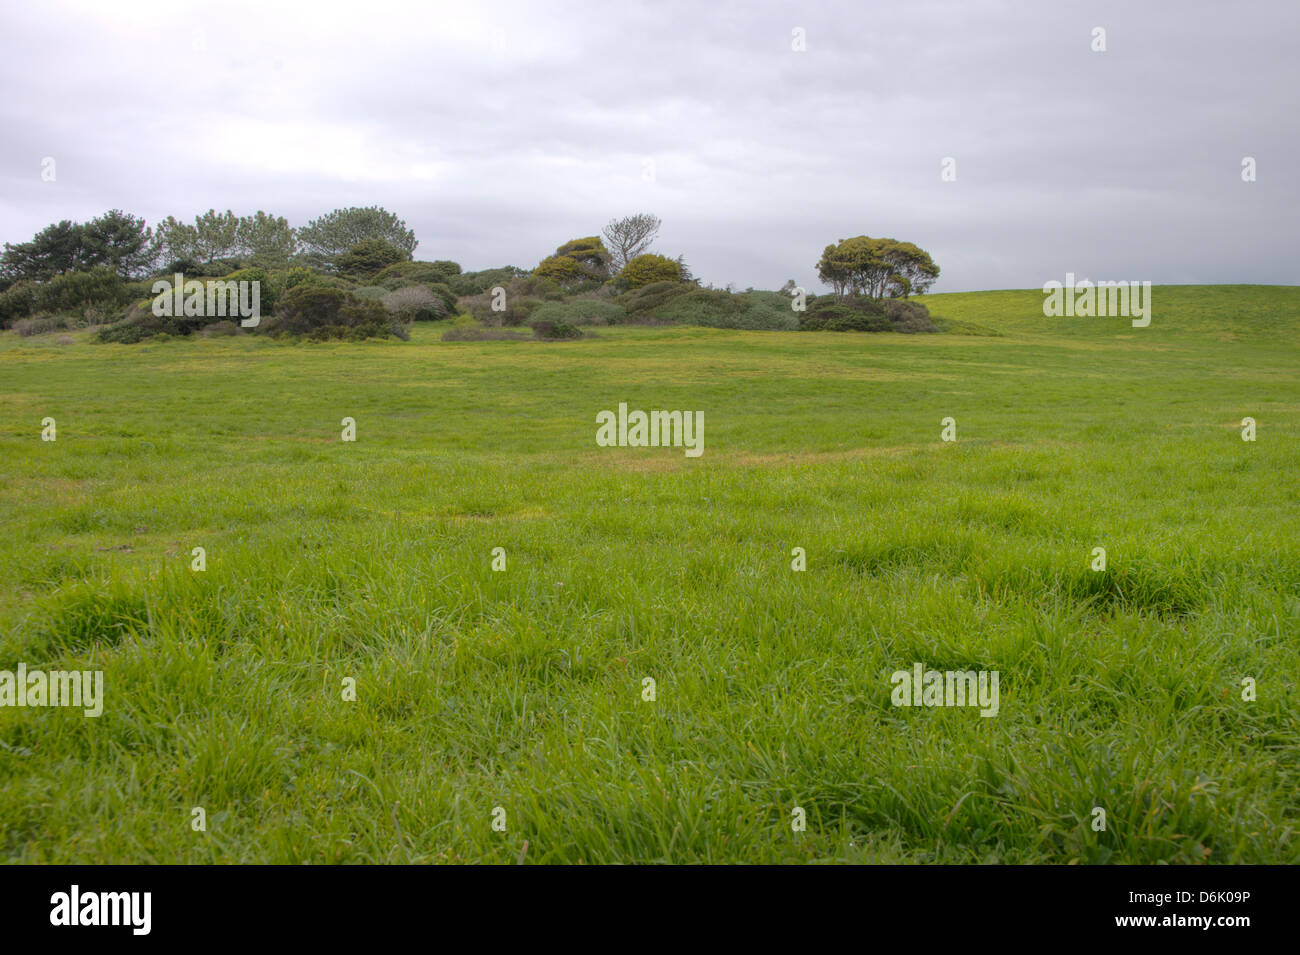 HDR image grassy meadow with trees and dramatic clouds Stock Photo